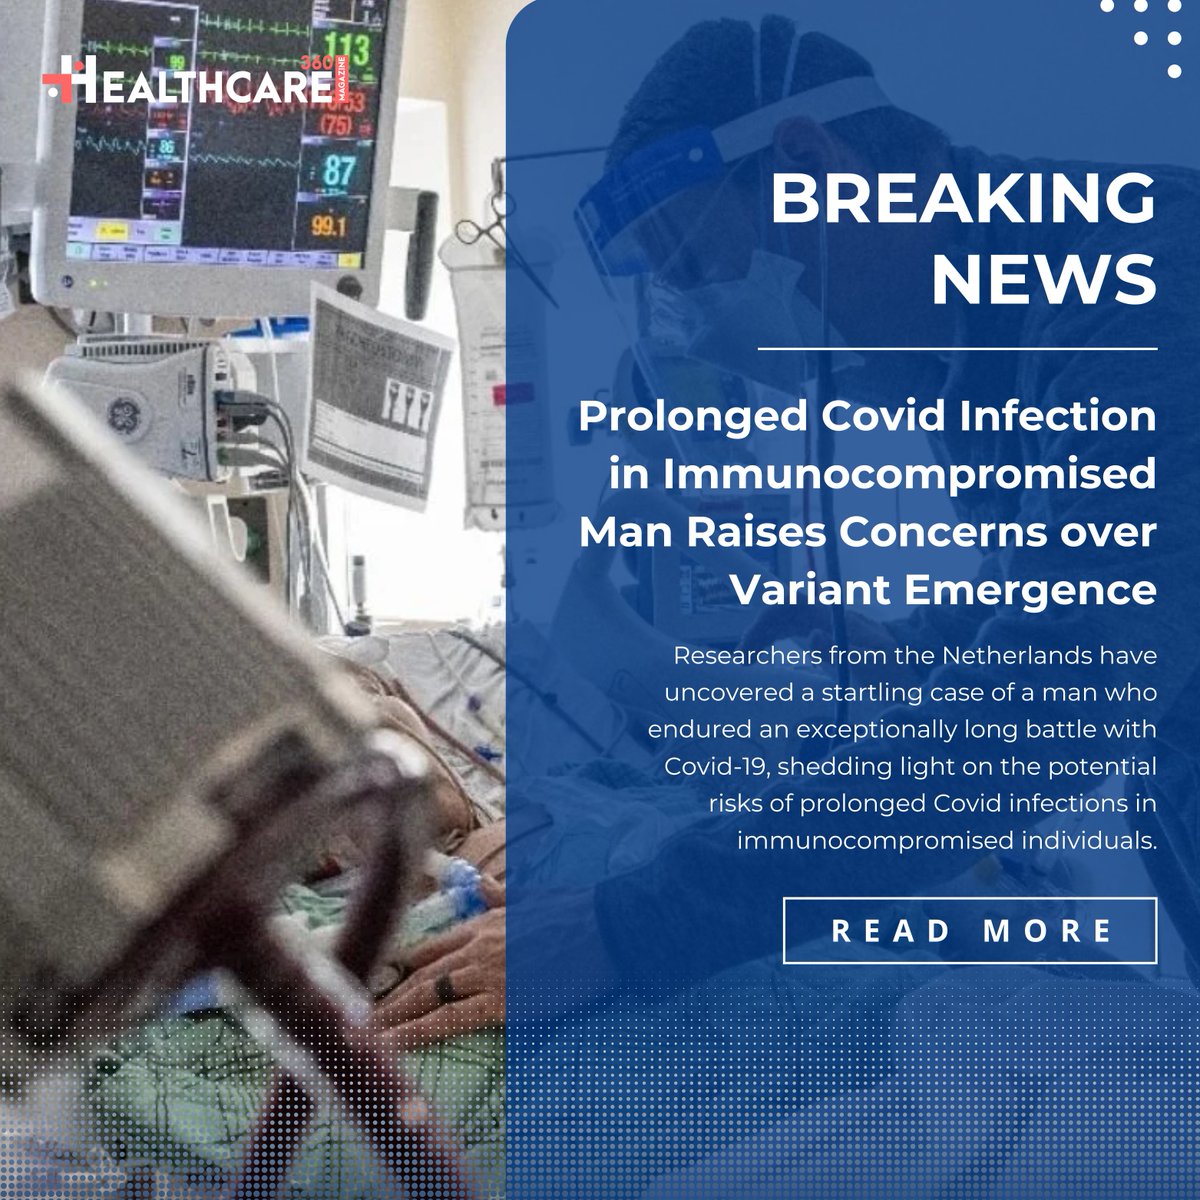 Prolonged Covid infection in immunocompromised patient sparks concerns over variant emergence! 

Read More: healthcare360magazine.com/prolonged-covi…

#CovidVariant #Immunocompromised #HealthcareResearch #VirusEvolution #PublicHealth #StayInformed #Covid19Awareness